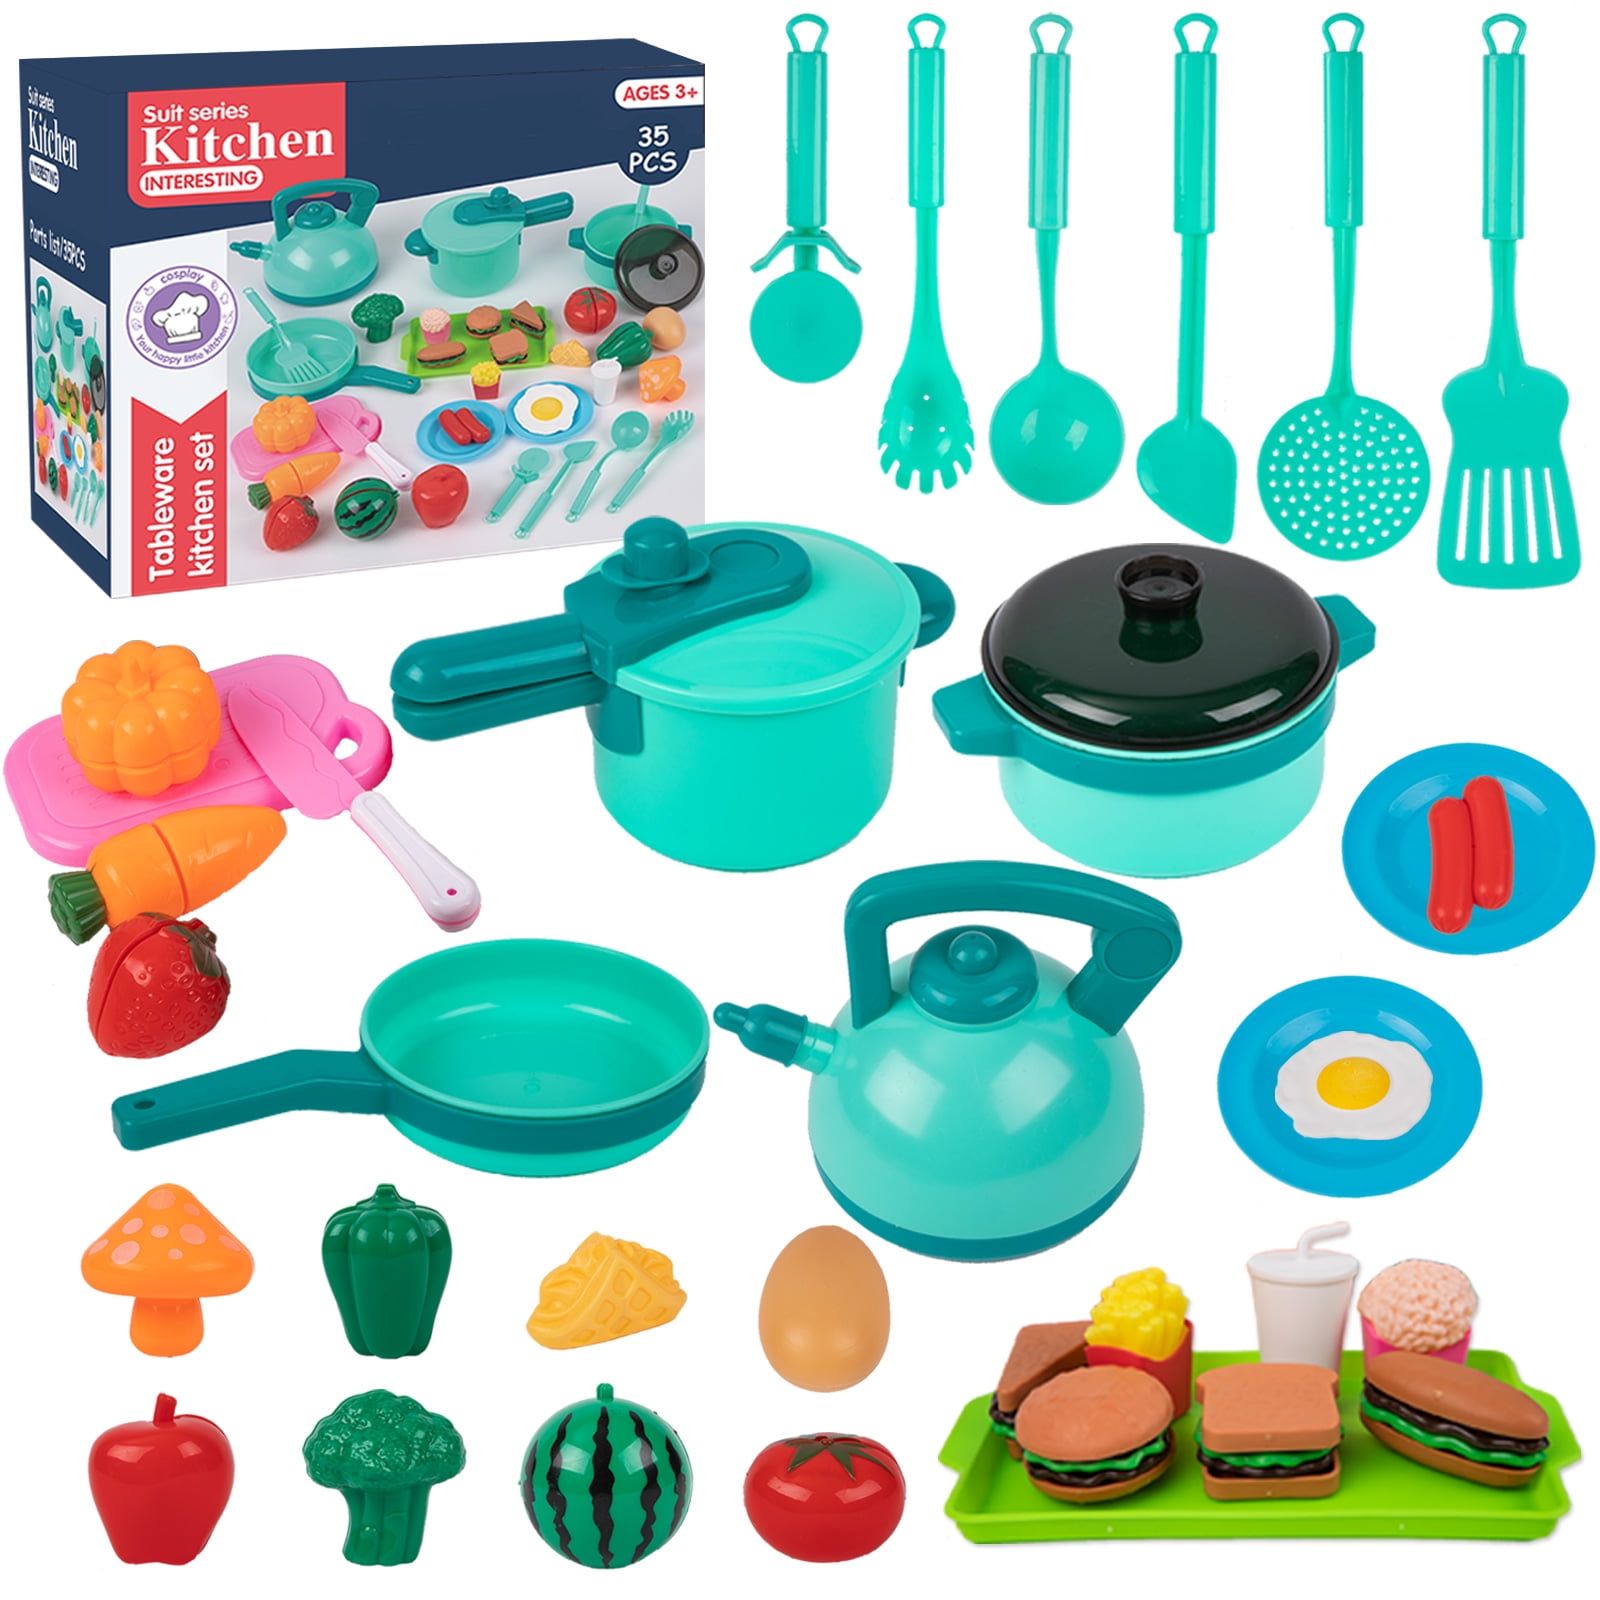 Details about   Kitchen Play Kids Set Toy Pretend Cooking Food Role Toys Gift Cookware Accessory 